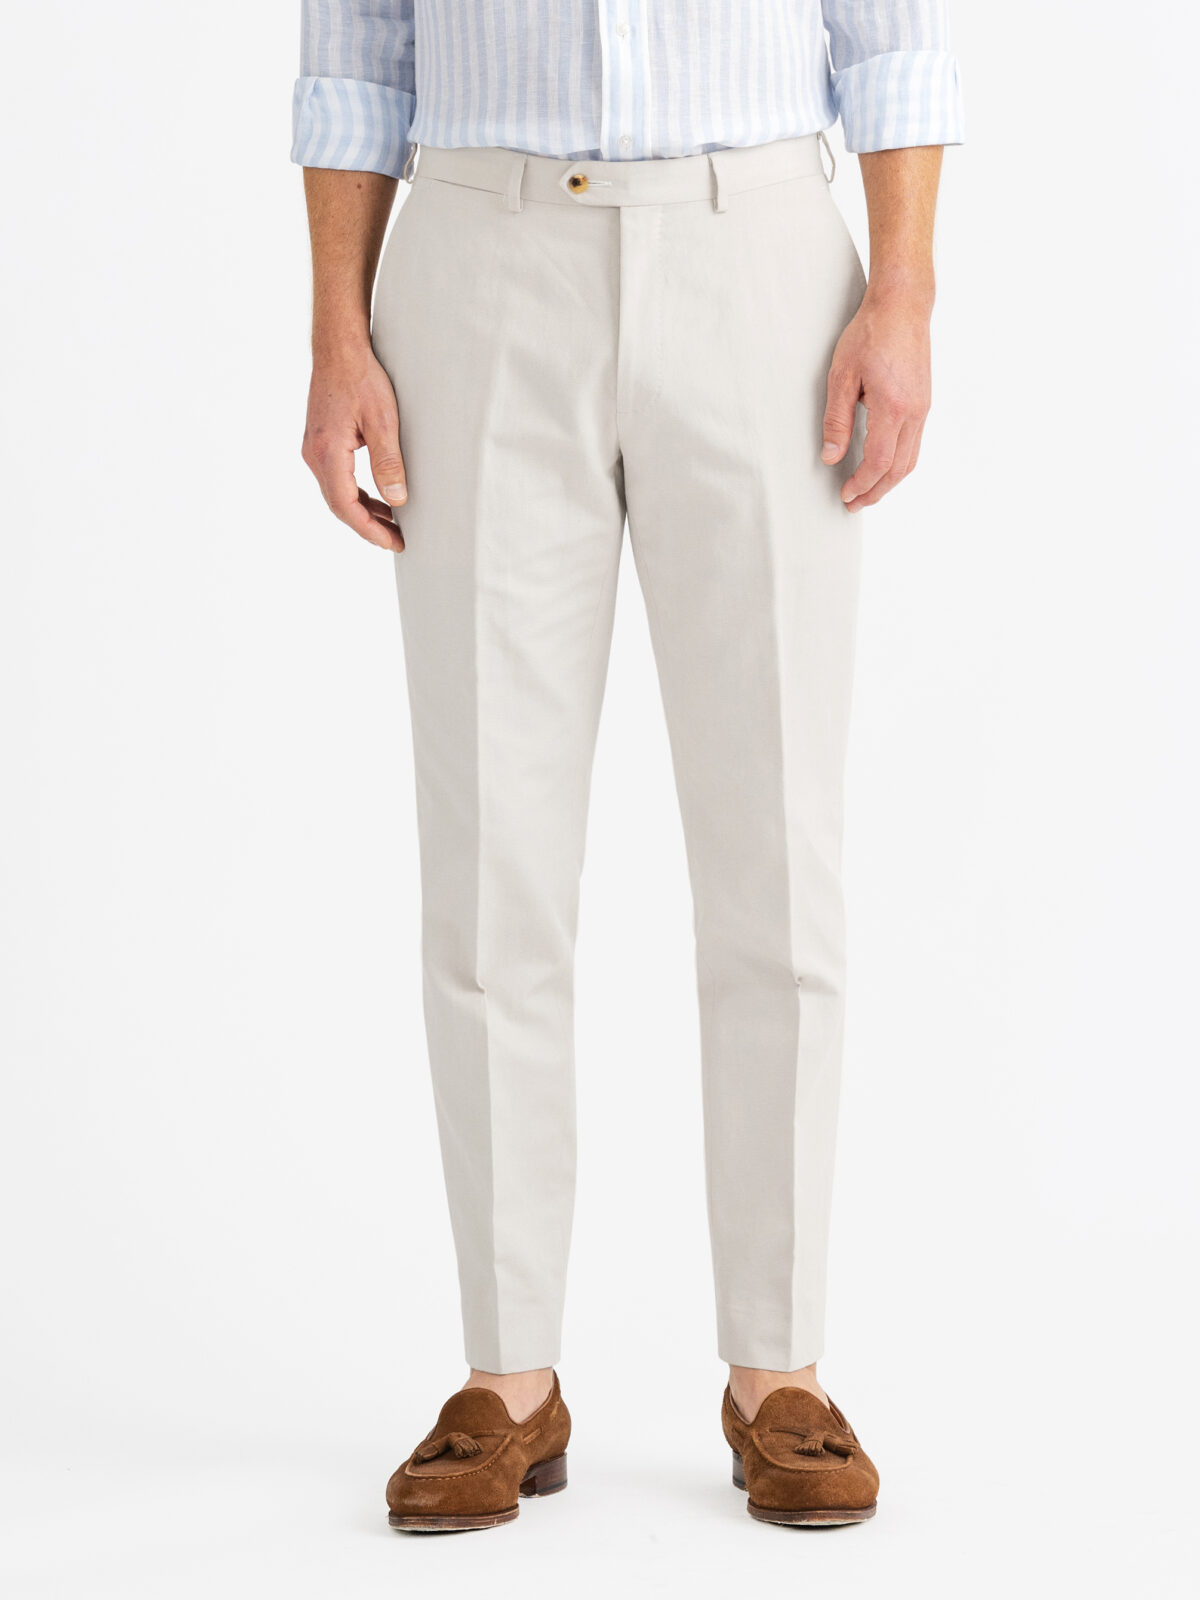 Slim Jogger Ankle Pants With Roll Cuffs - Light Stone Blue | NYDJ